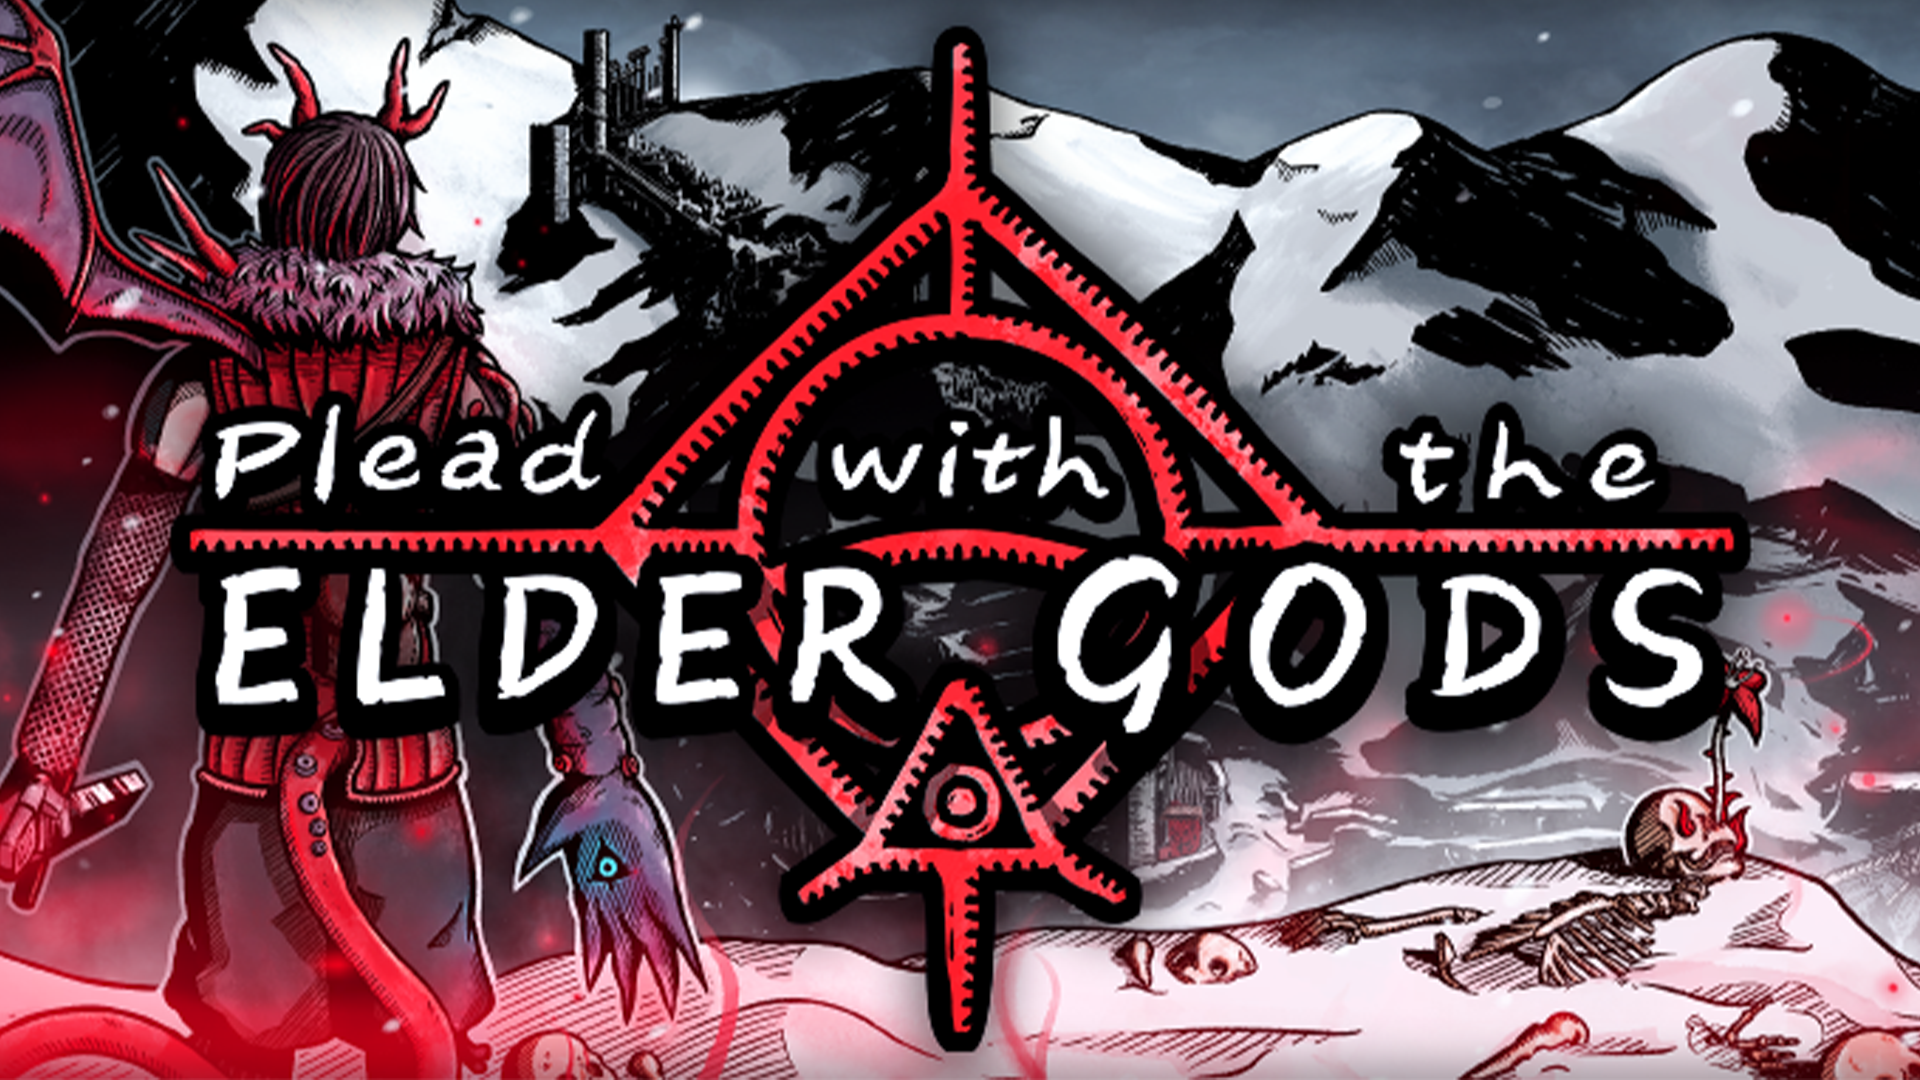 Promotional art for Plead with the Elder Gods